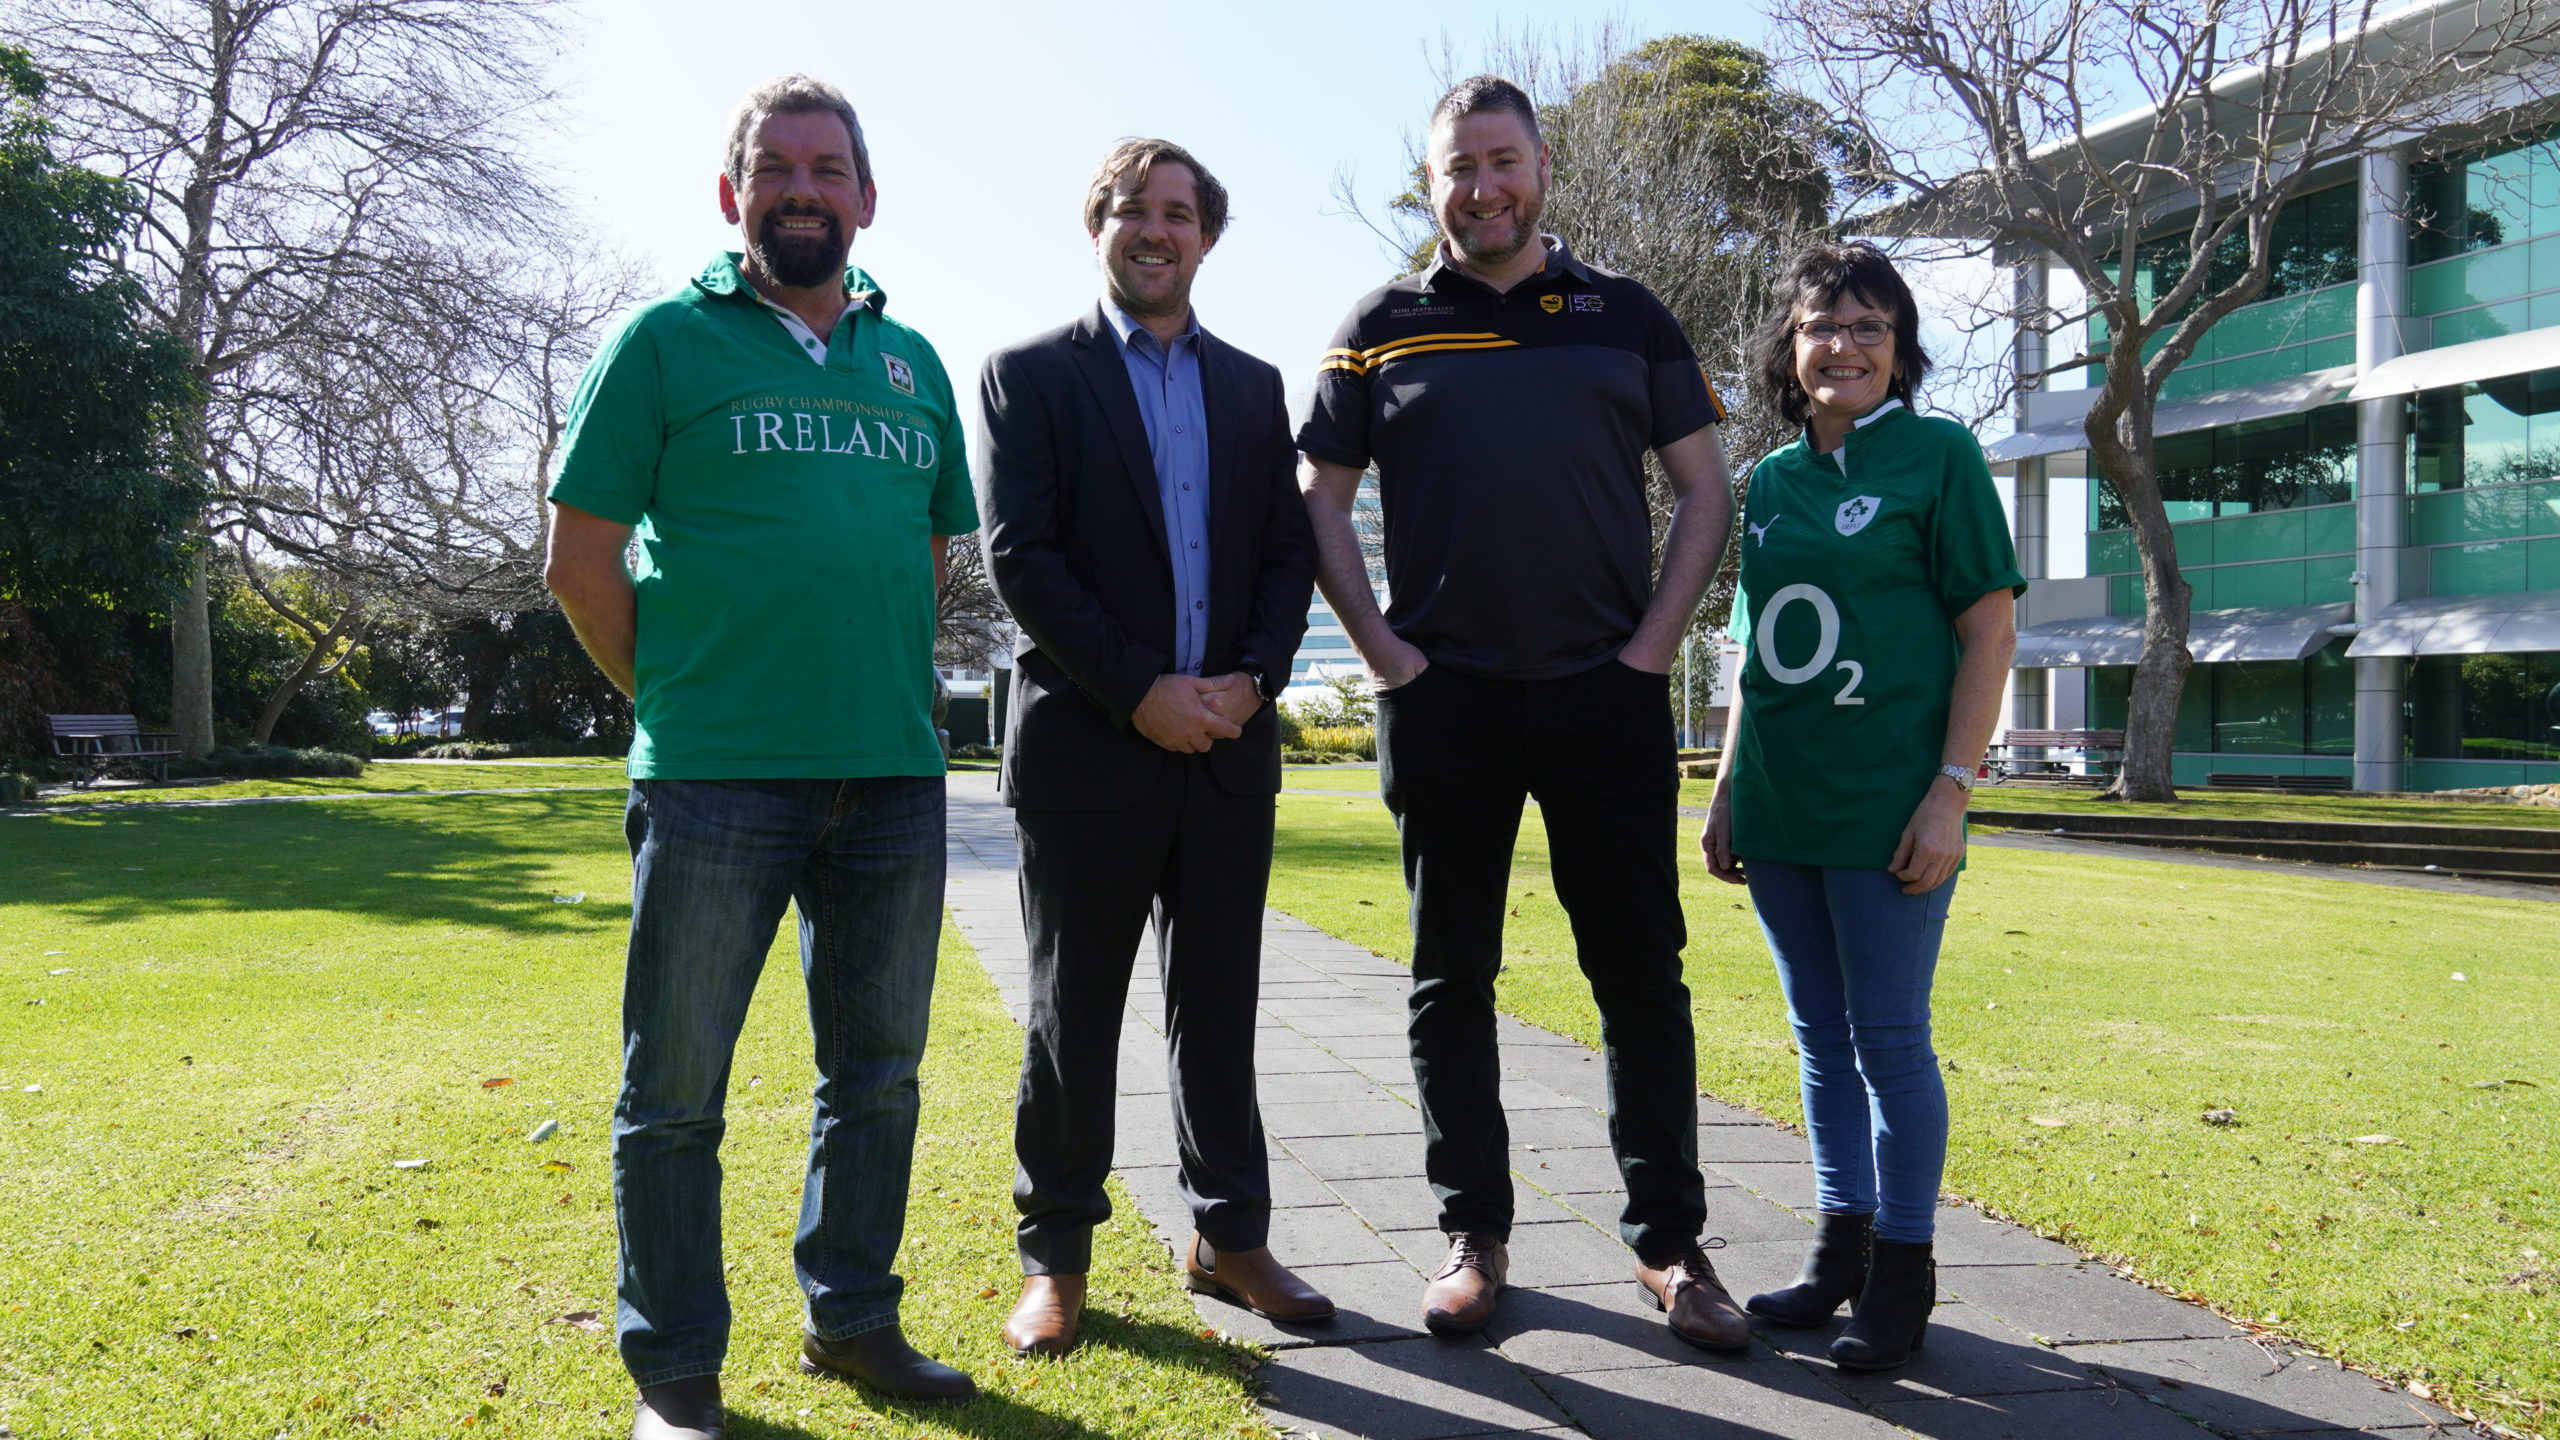 Three men, one wearing a colourful green shirt with the word 'Ireland' on its front, and a woman stand on a pathway in the middle of Bunbury Council Gardens.